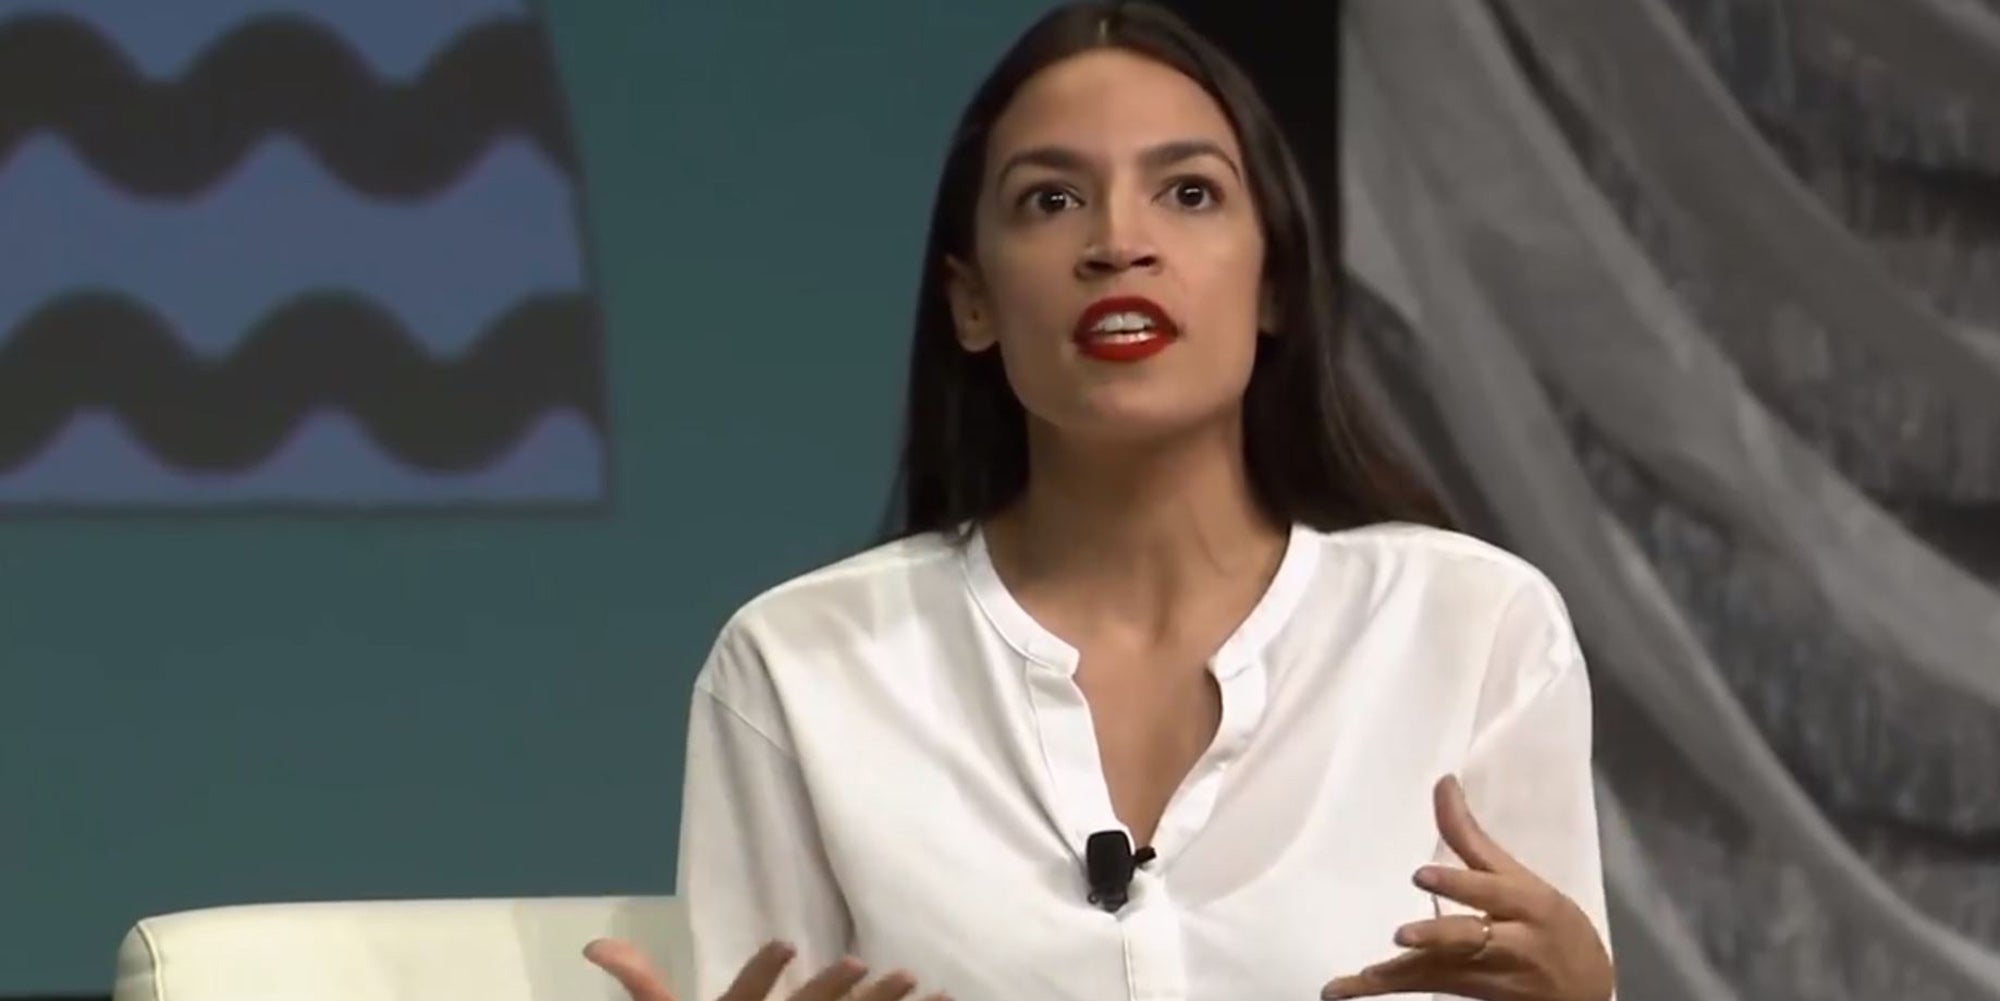 Alexandria Ocasio-Cortez sums up moderates during panel at SXSW in Texas | indy100